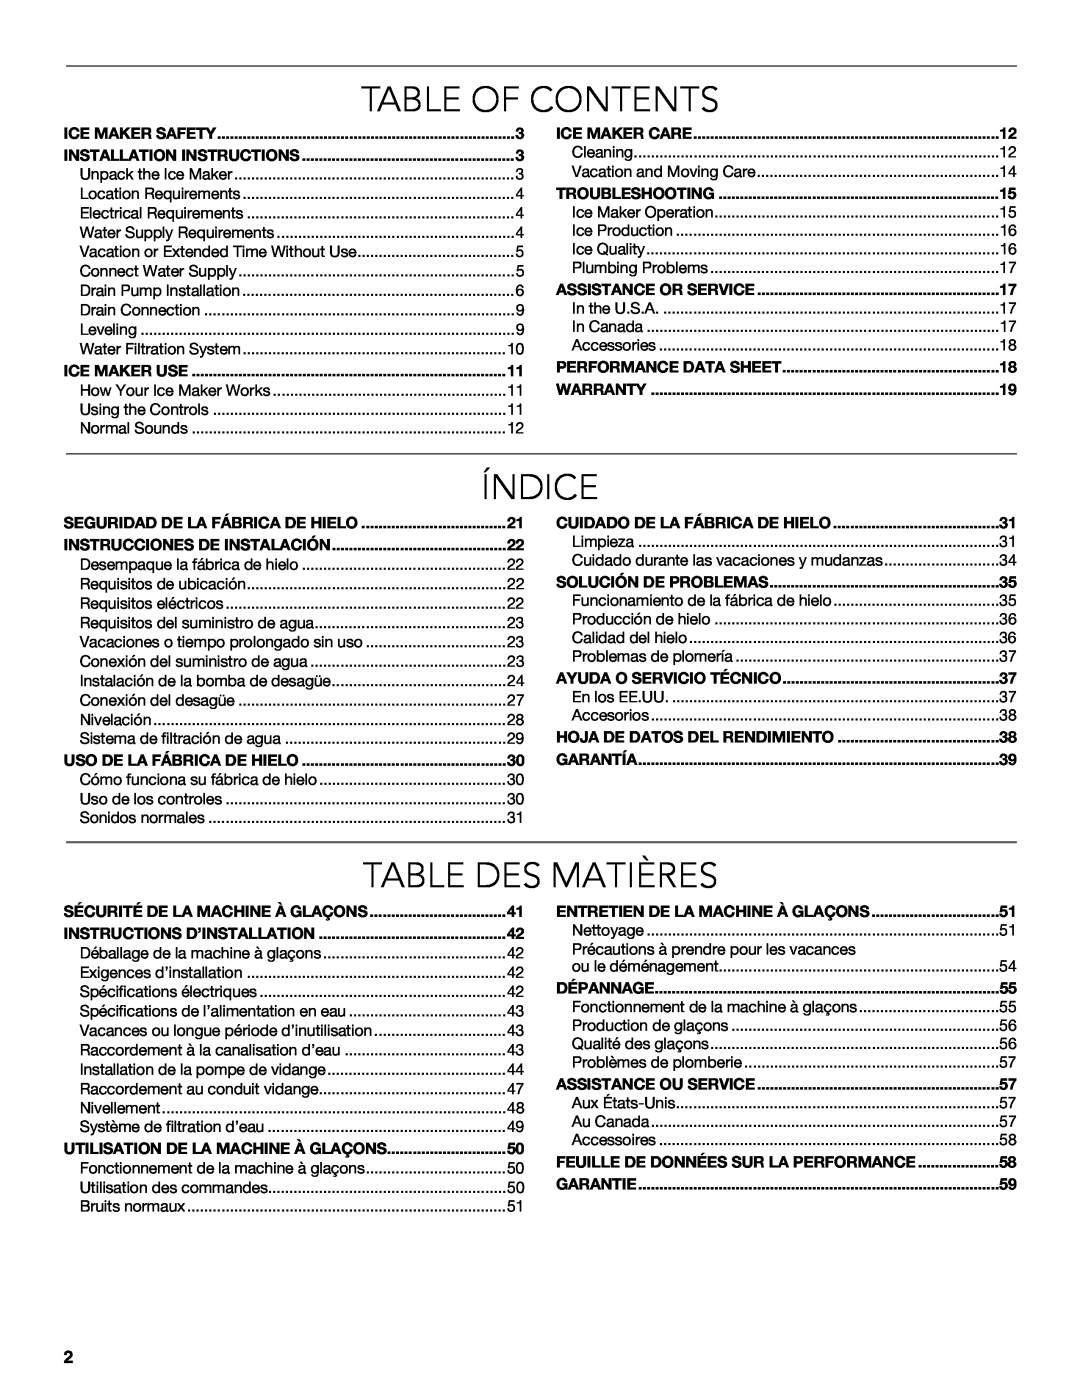 KitchenAid W10515677C Table Of Contents, Índice, Table Des Matières, Ice Maker Safety, Installation Instructions, Warranty 